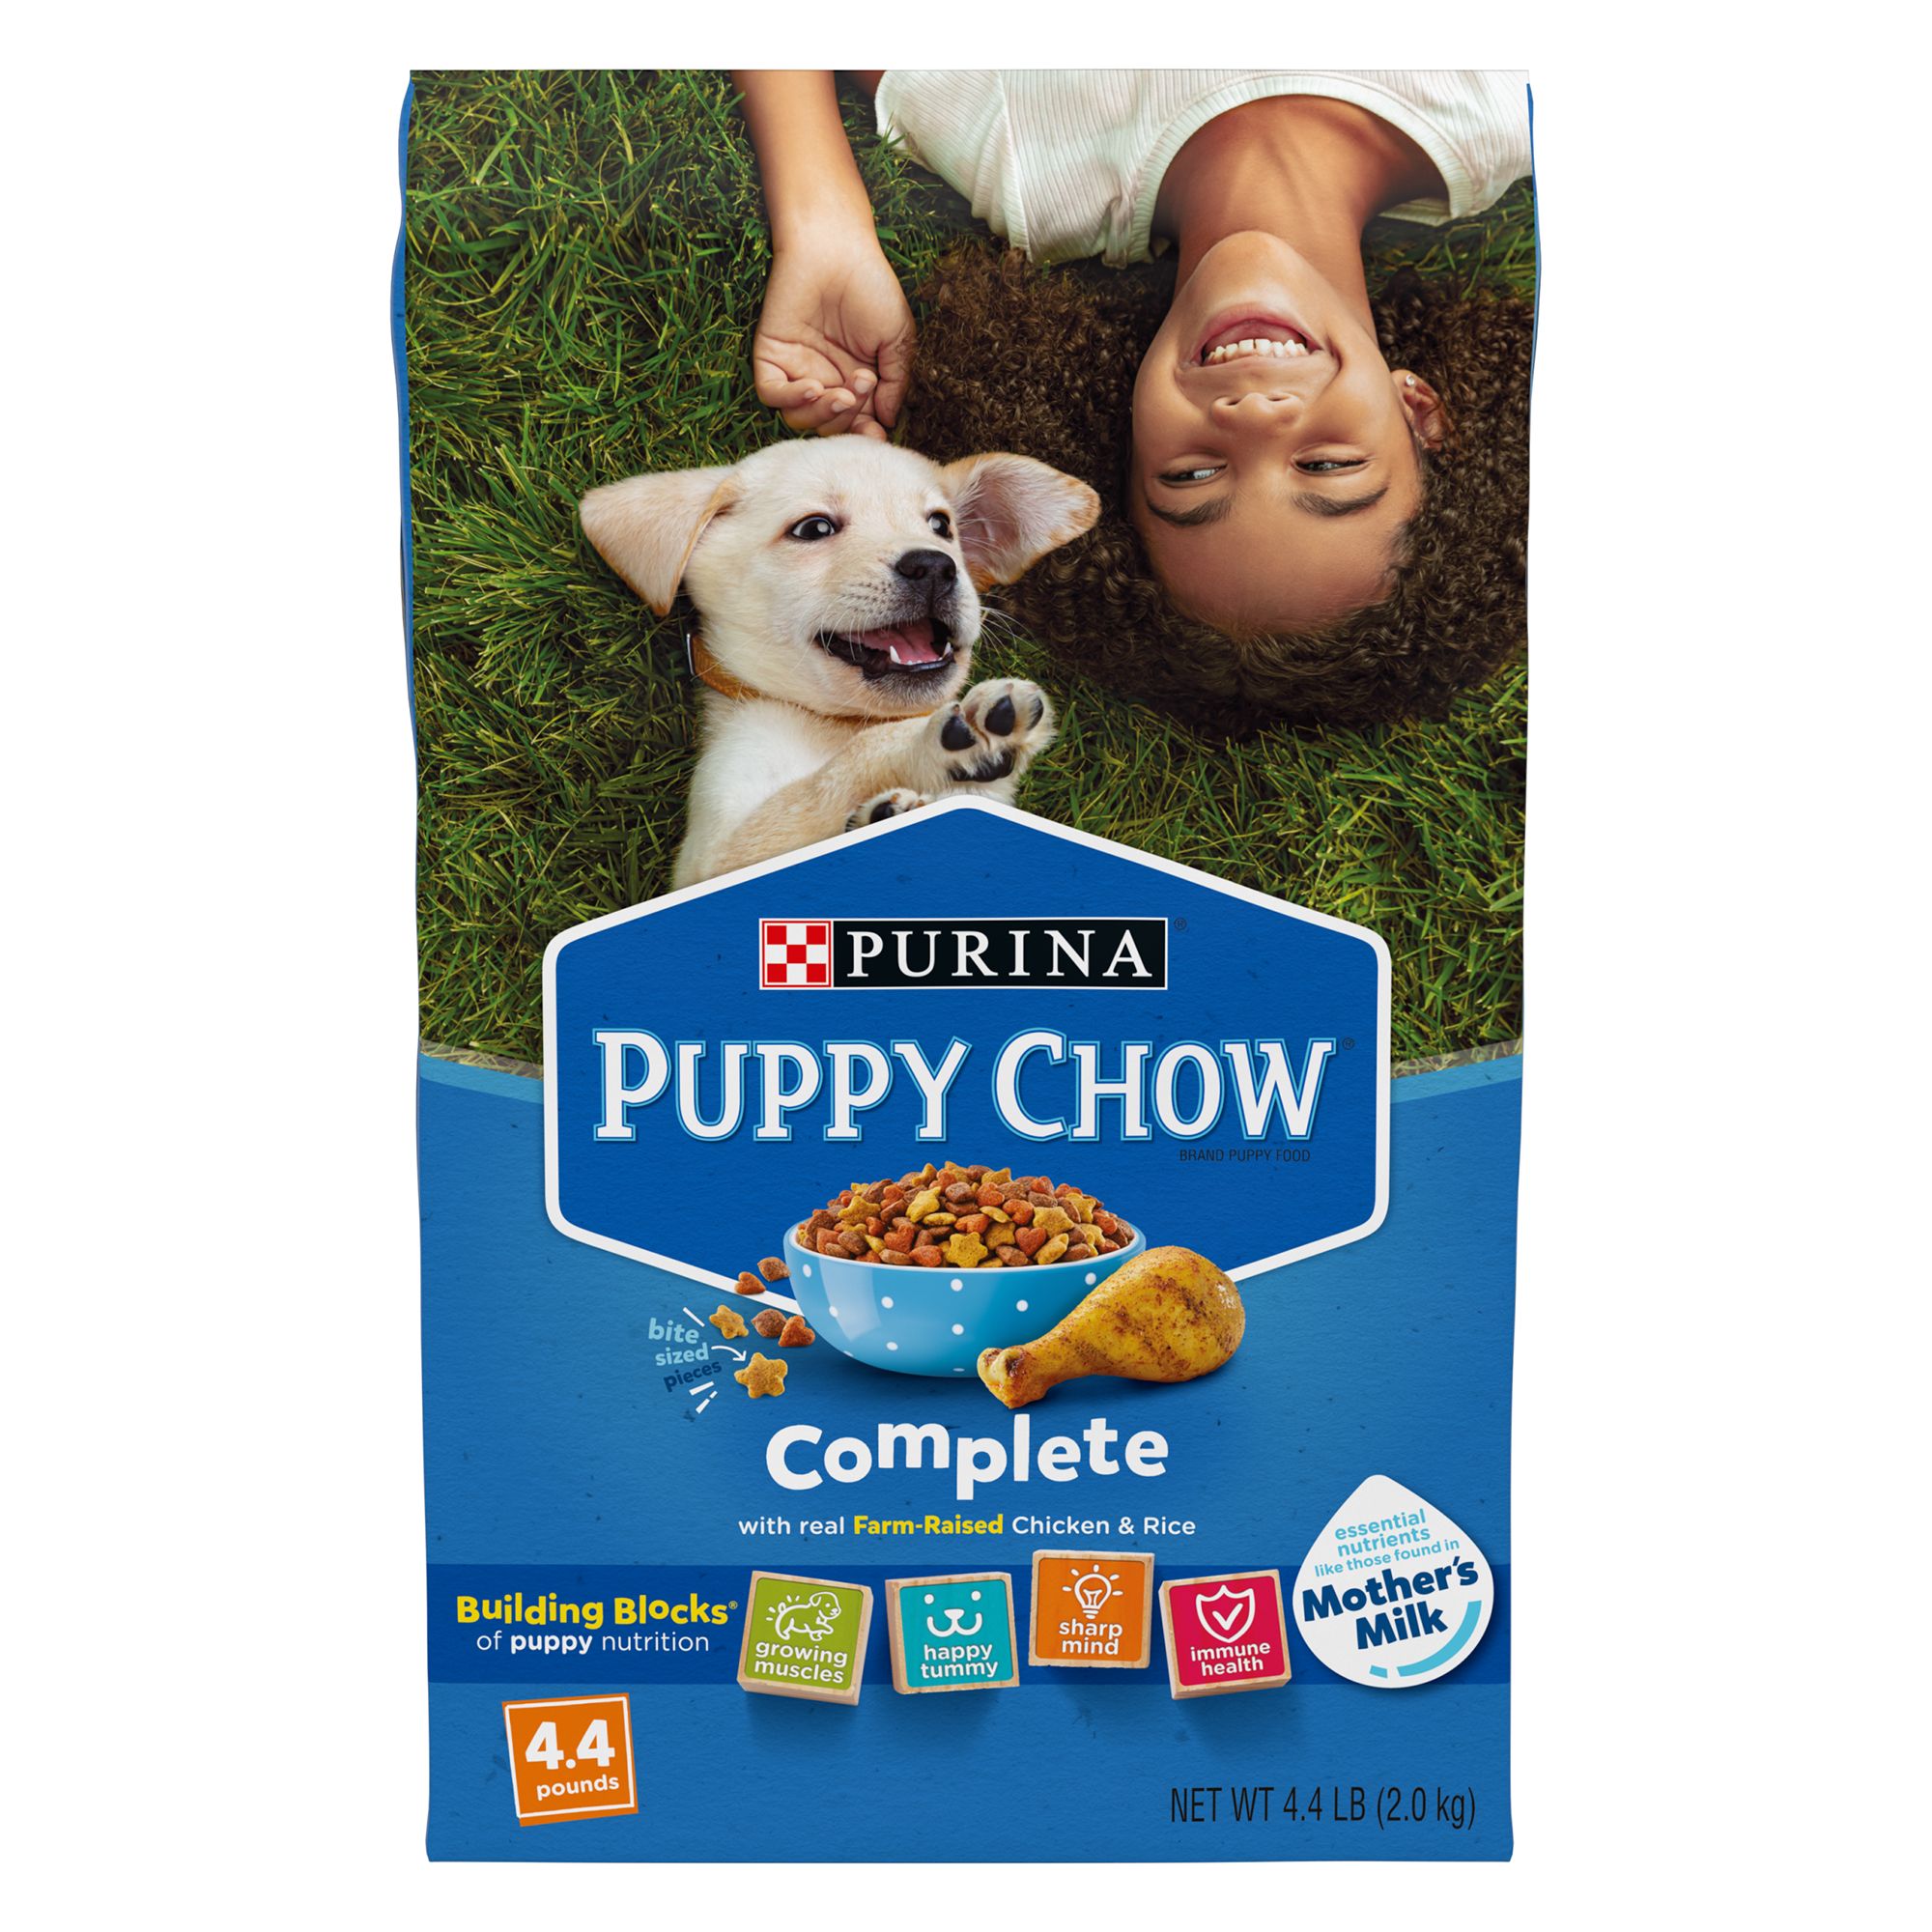 Purina Puppy Chow Complete Dog Food 